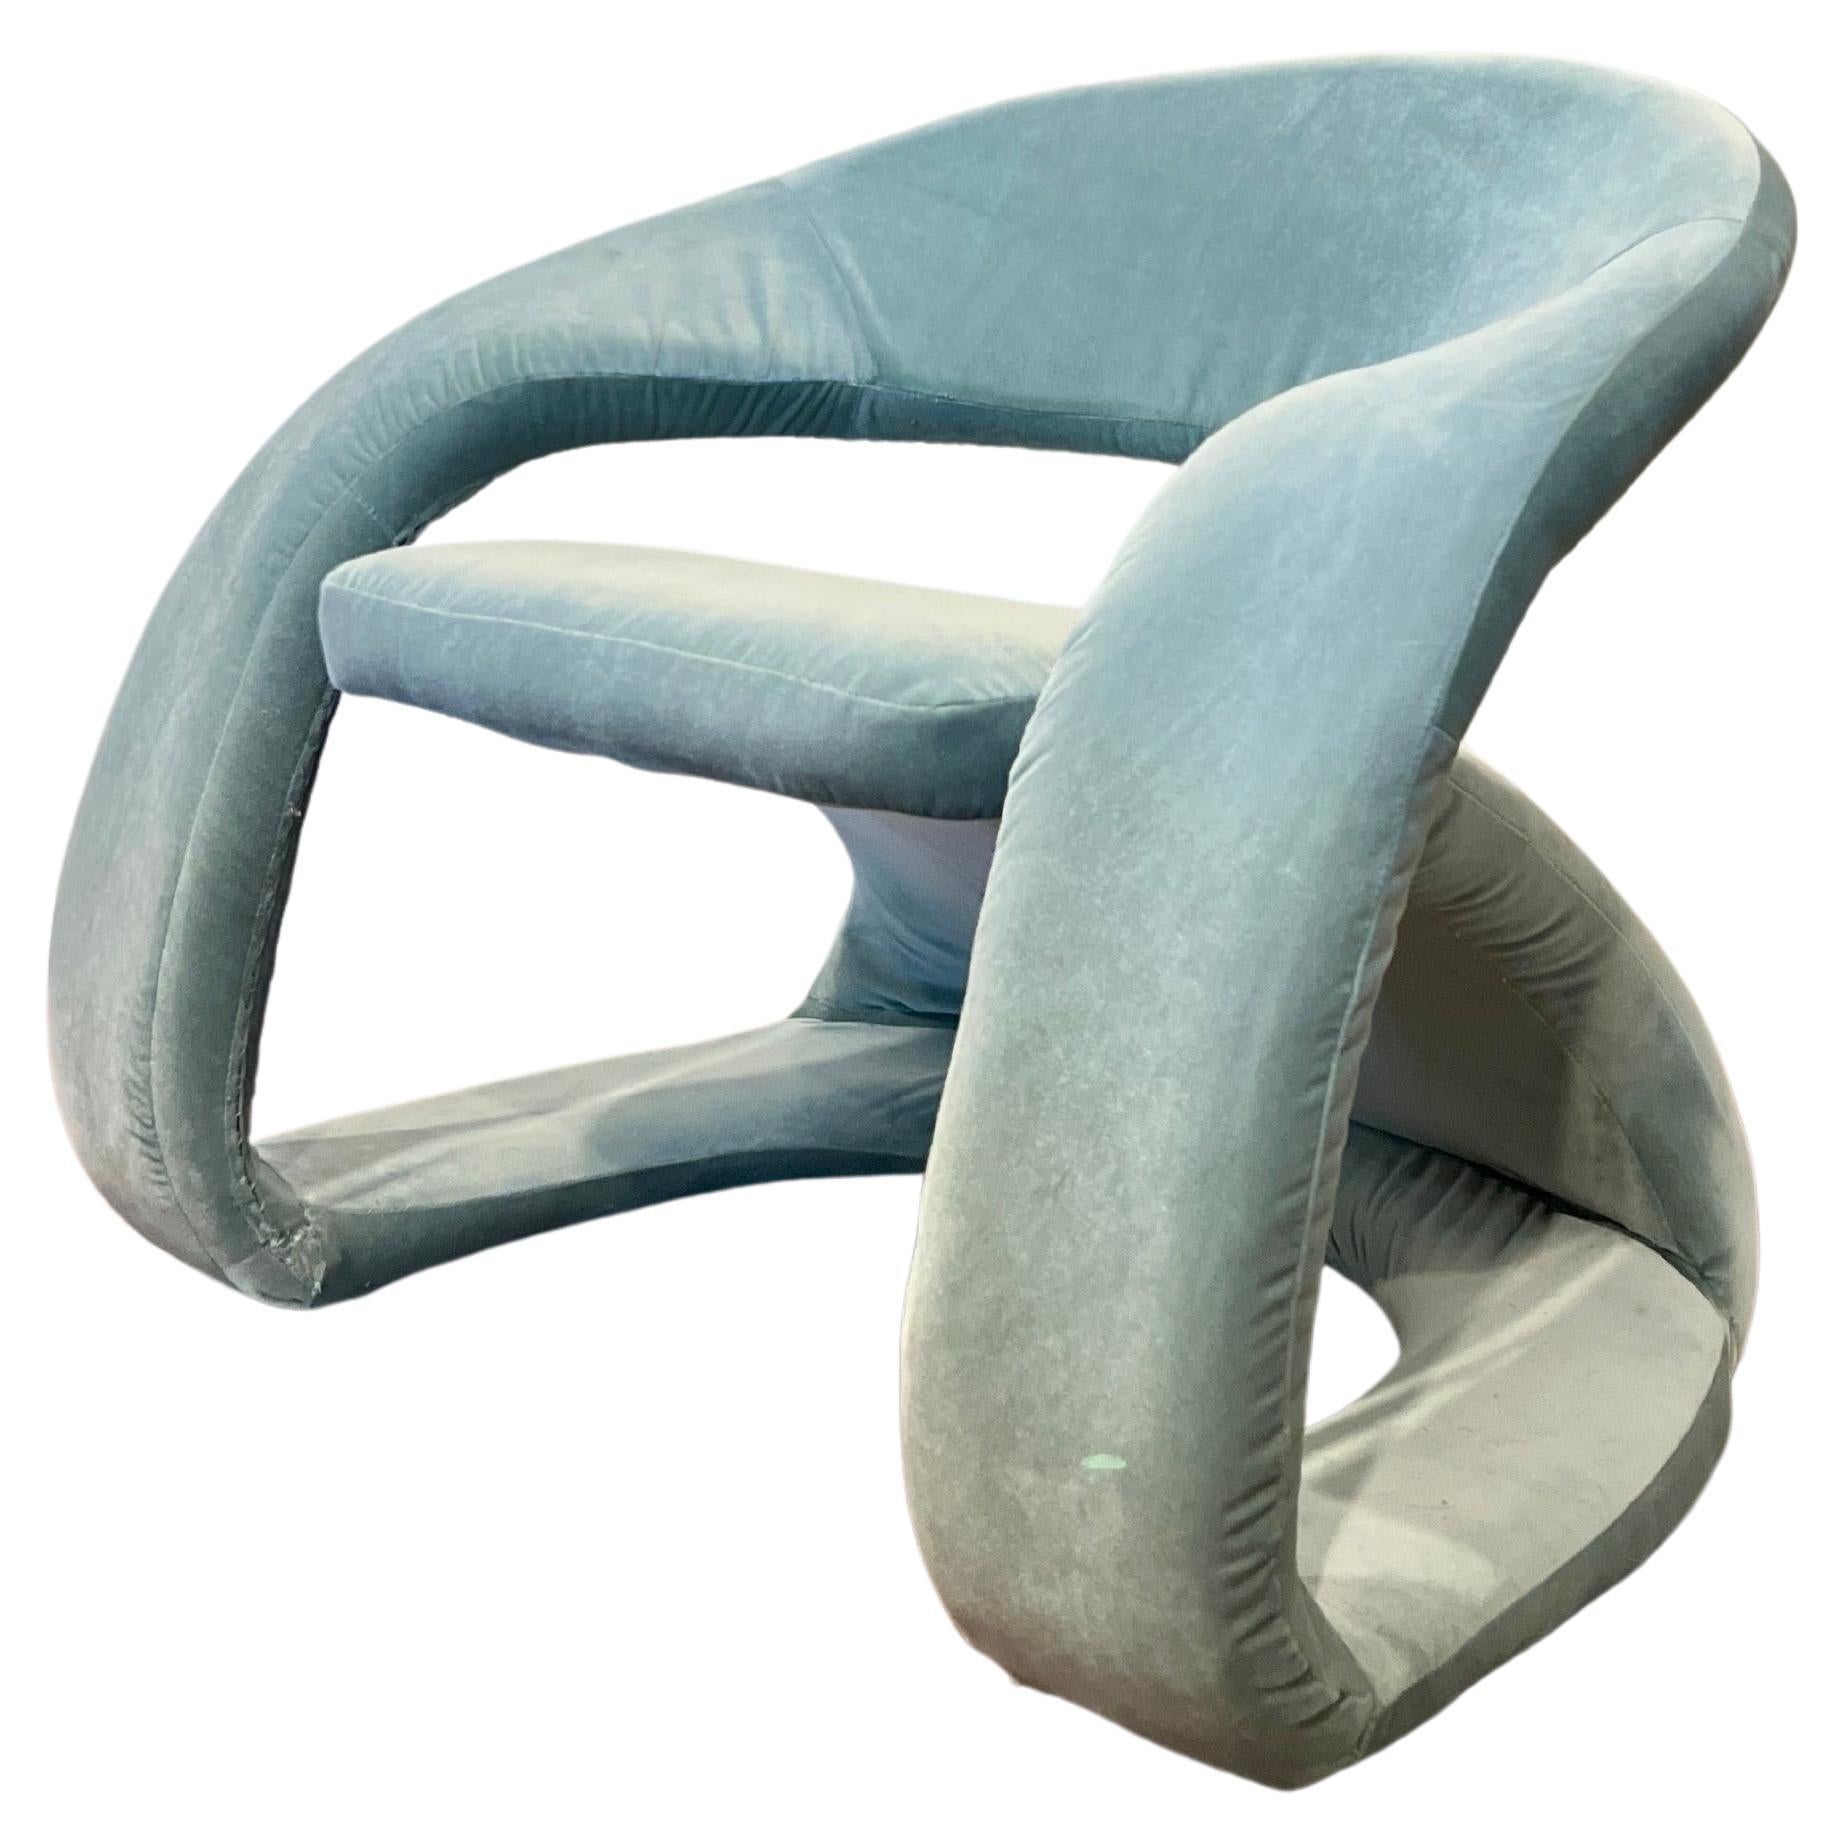 The coveted sculptural Jaymar tongue chair, circa 80s-90s. Designed after the works of Louis Durot and Pierre Paulin, the iconic cantilevered style made these Jaymar 